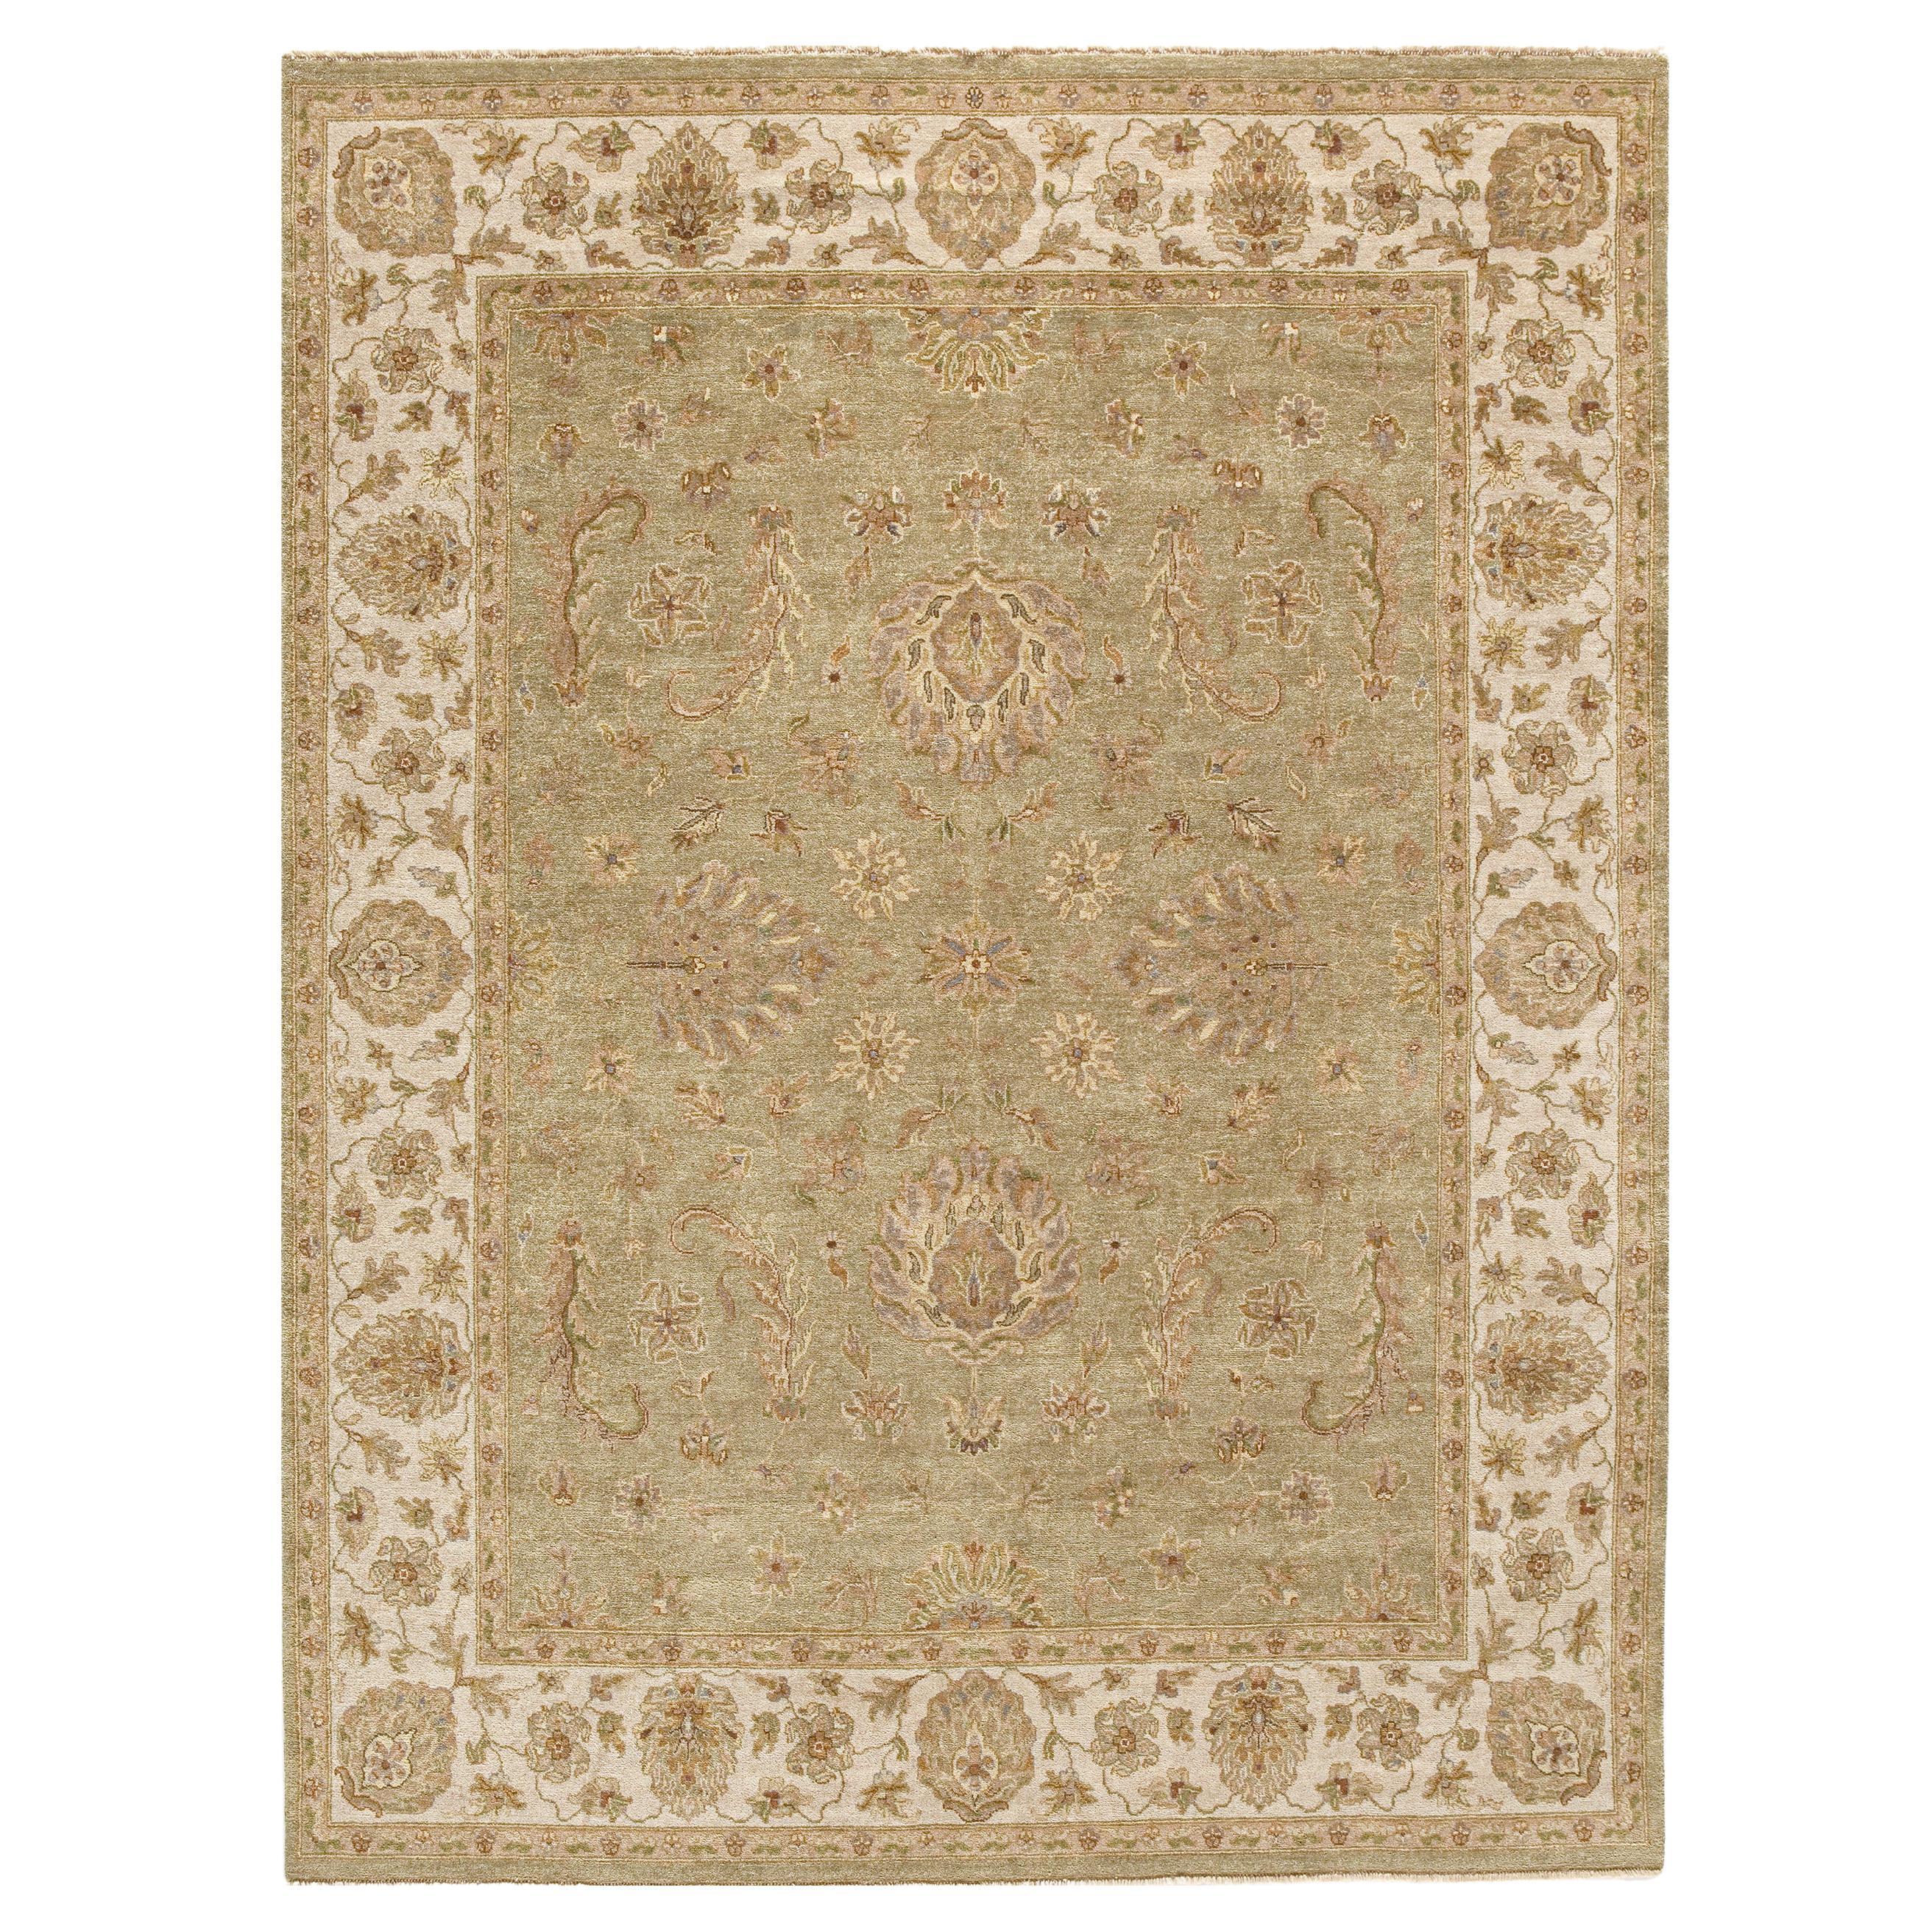 Luxury Traditional Hand-Knotted Amritsar Agra Lt. Green/Ivory 14x28 Rug